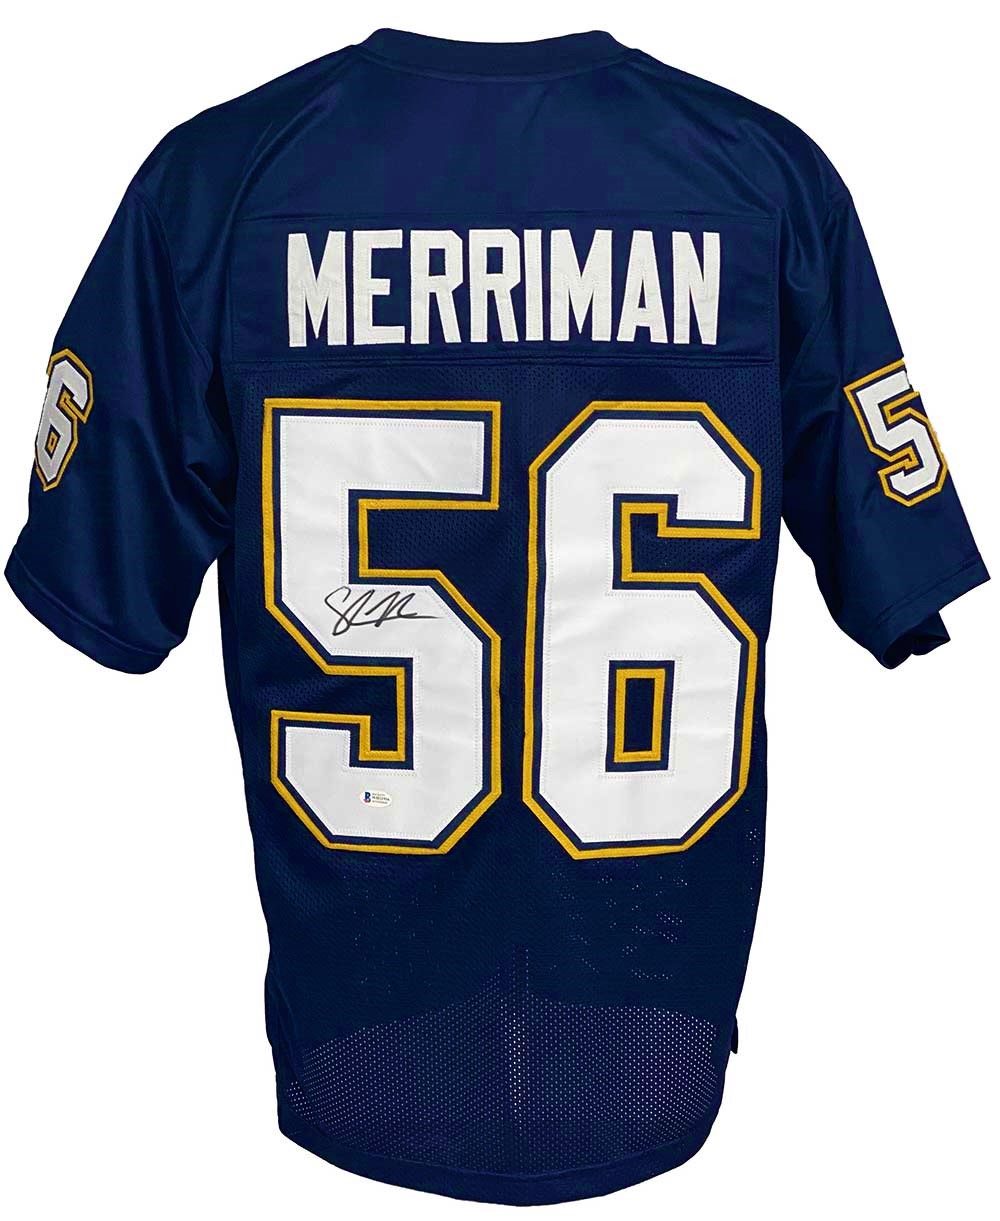 Los Angeles Chargers Shawne Merriman Autographed Pro Style Navy Blue Jersey BAS Authenticated